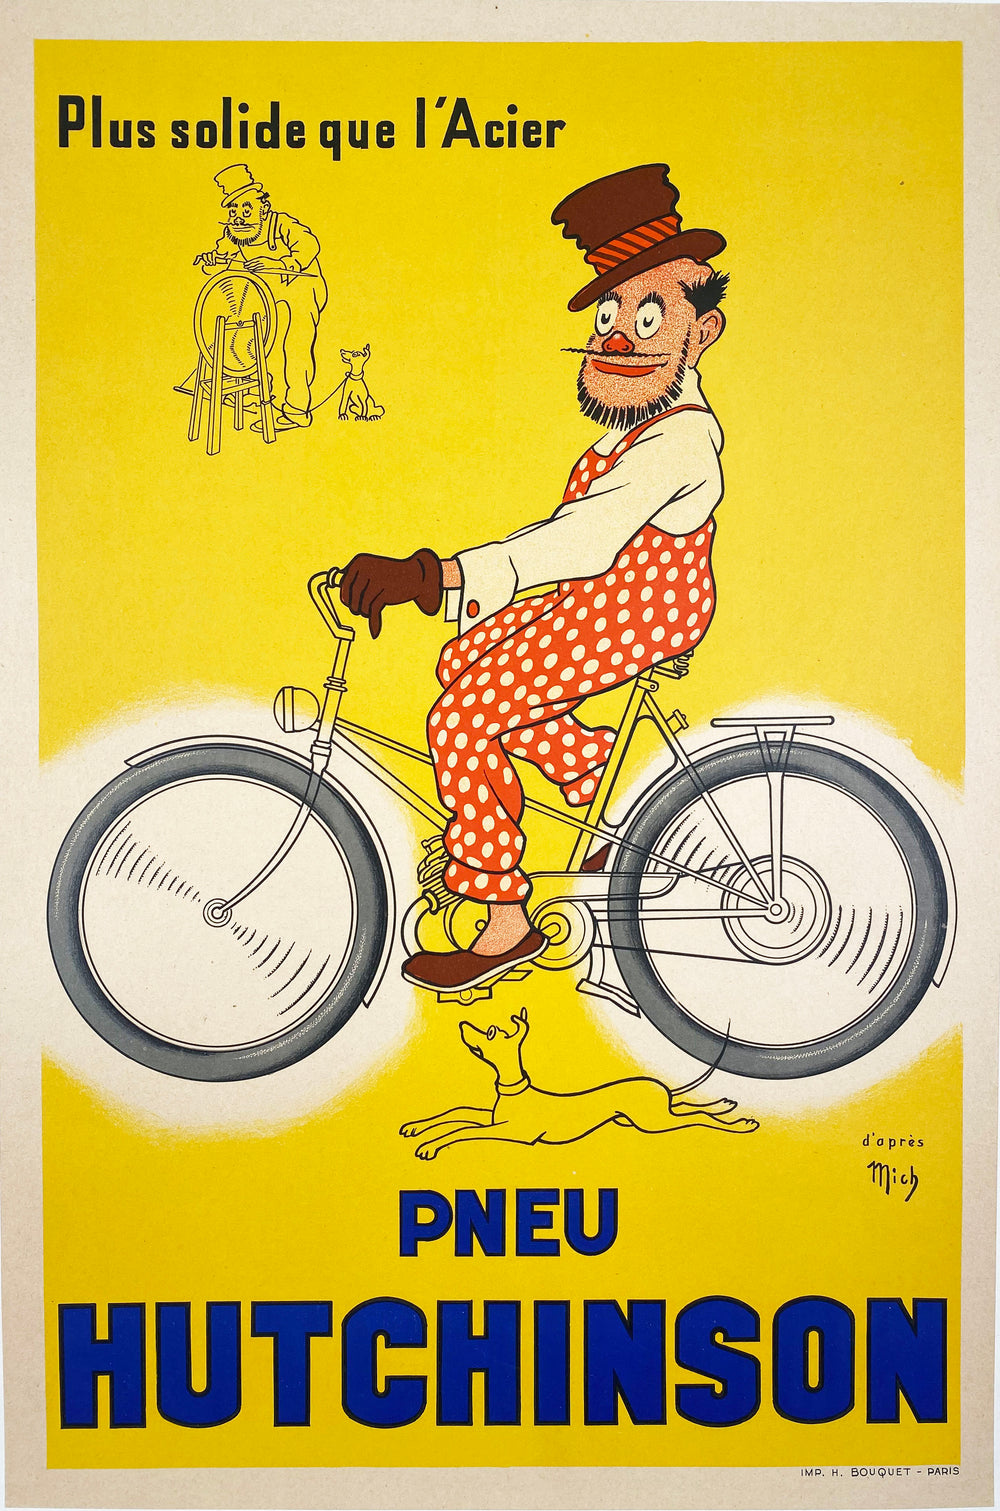 Pneu Hutchinson - Vintage French cycles poster 1939.